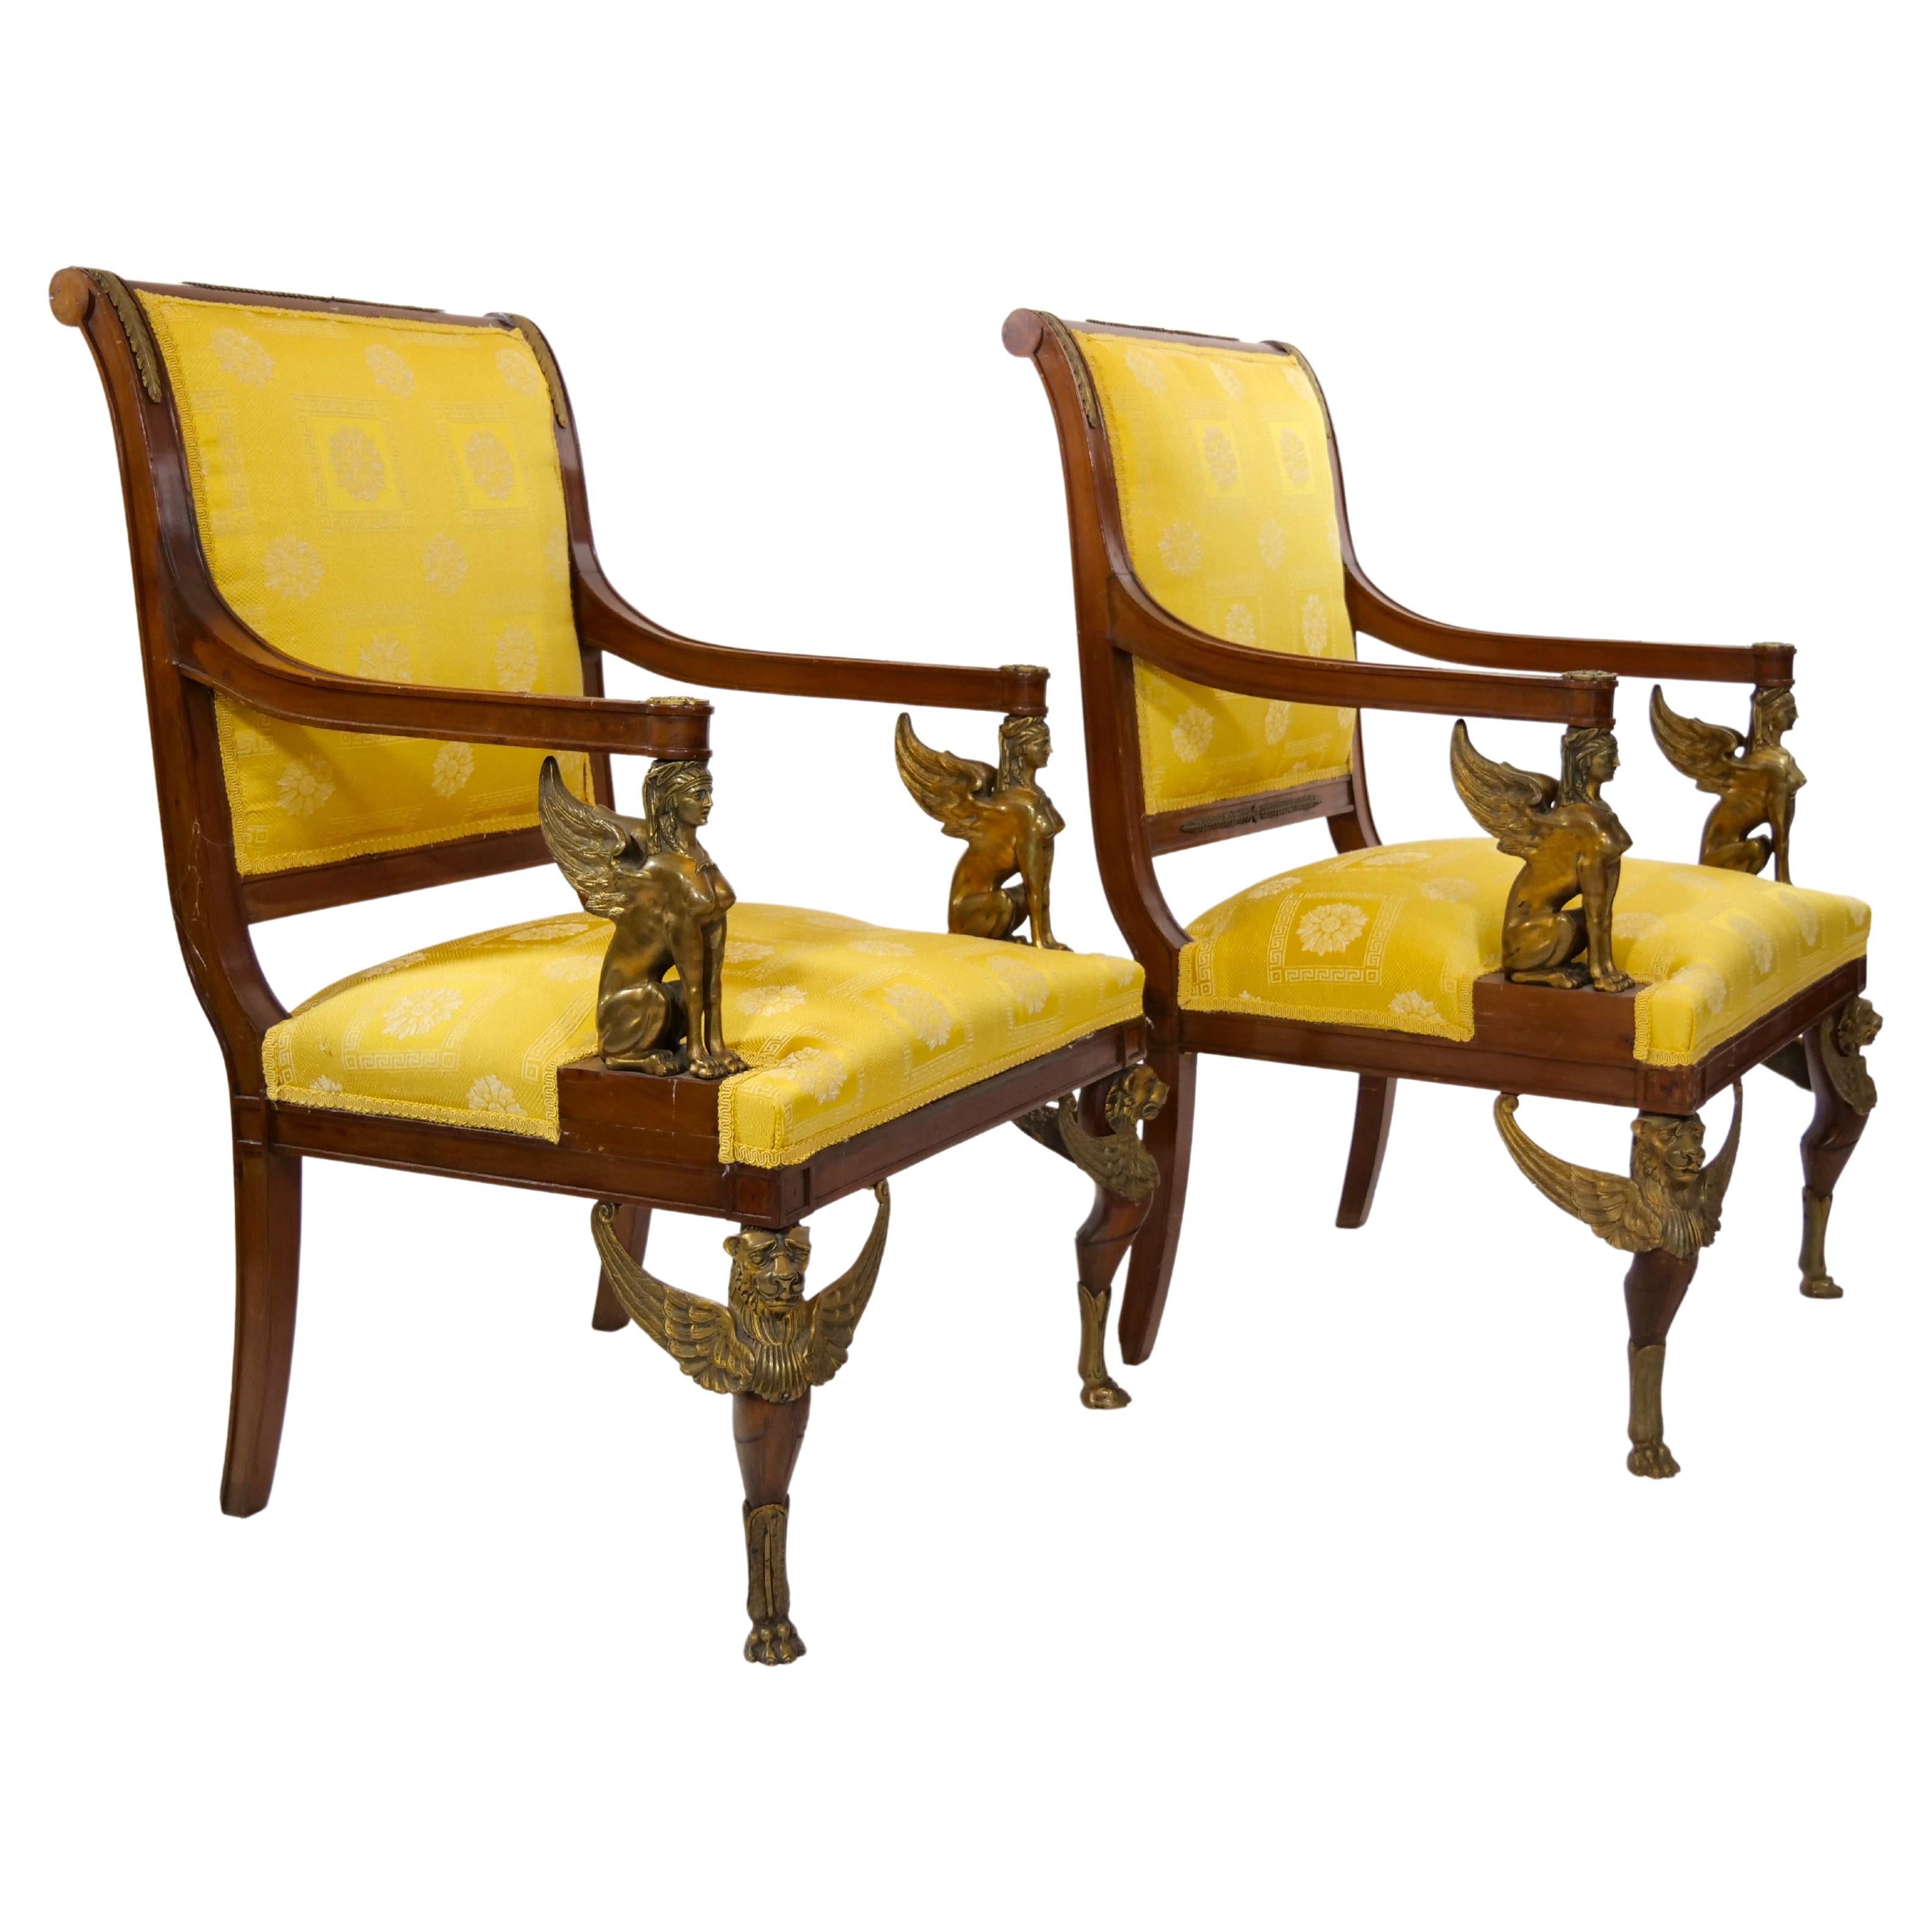 19th century French Empire style handcrafted gilt bronze mahogany framed upholstered pair of armchair. Each armchairs is set on four straight mahogany legs, the front two of which are set on gilt bronze paw feet. Gilt bronze sphinxes serve as arm